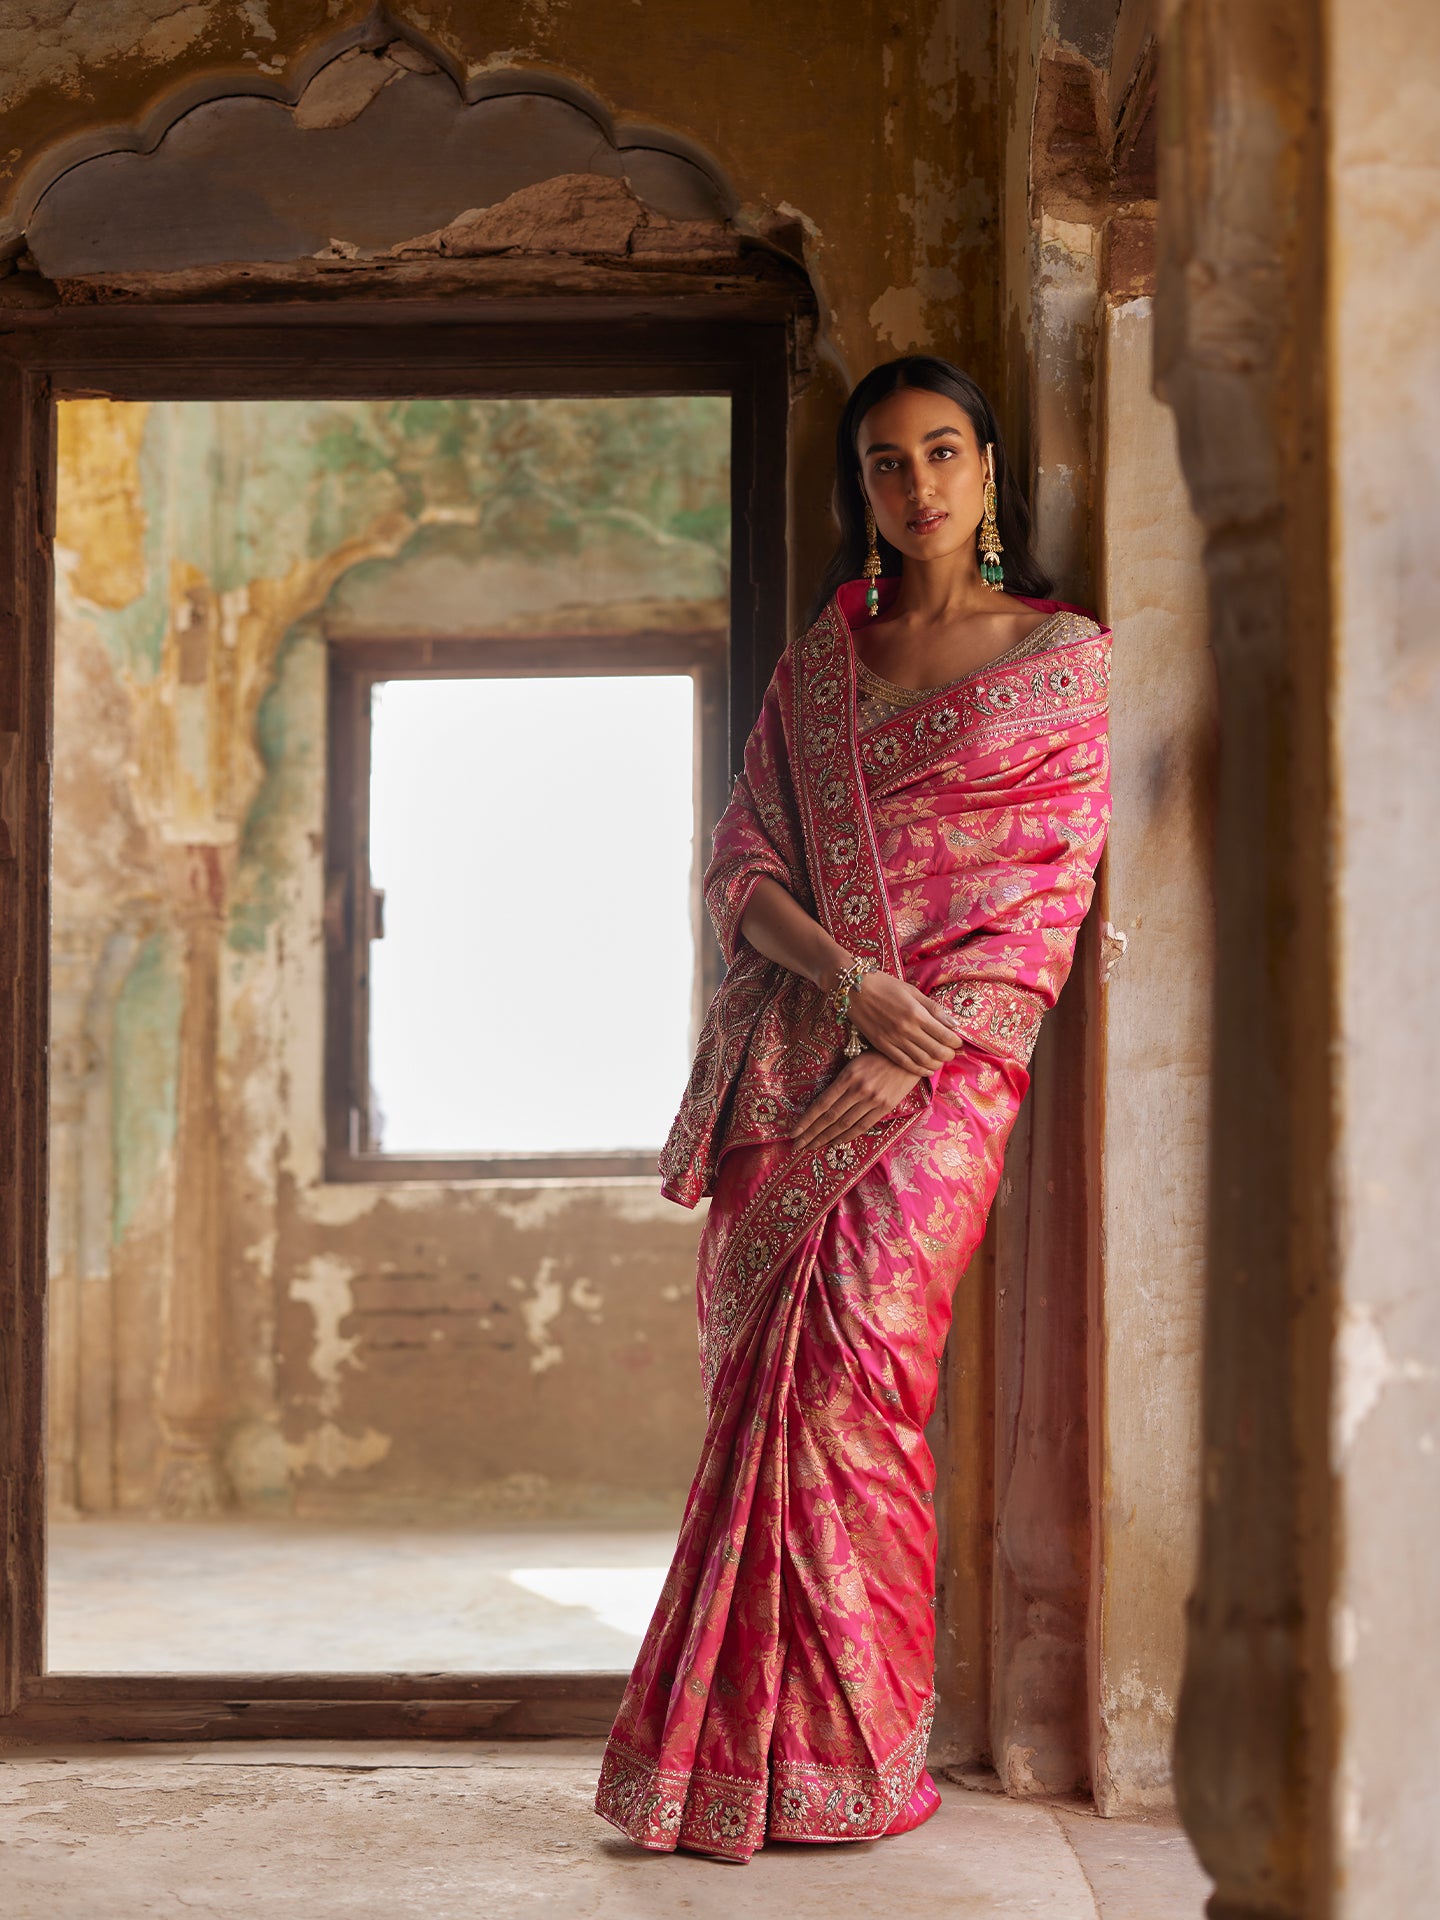 Best Saree Collection for Women in India - Malhotra's Indian Heritage